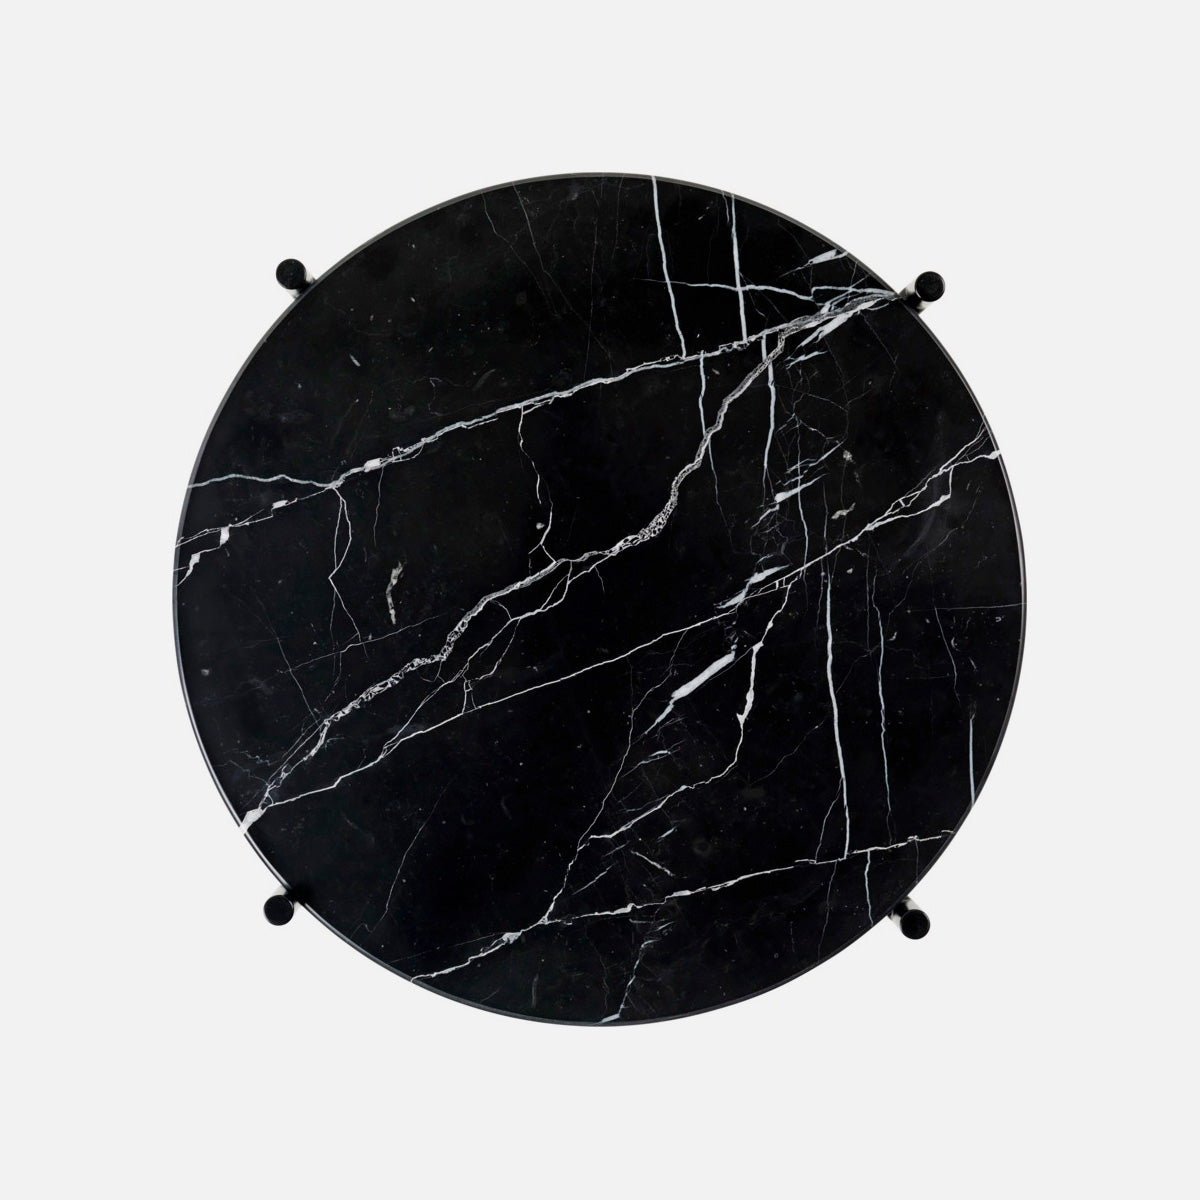 TS Side Table φ40 Brass / Black Marquina Marble